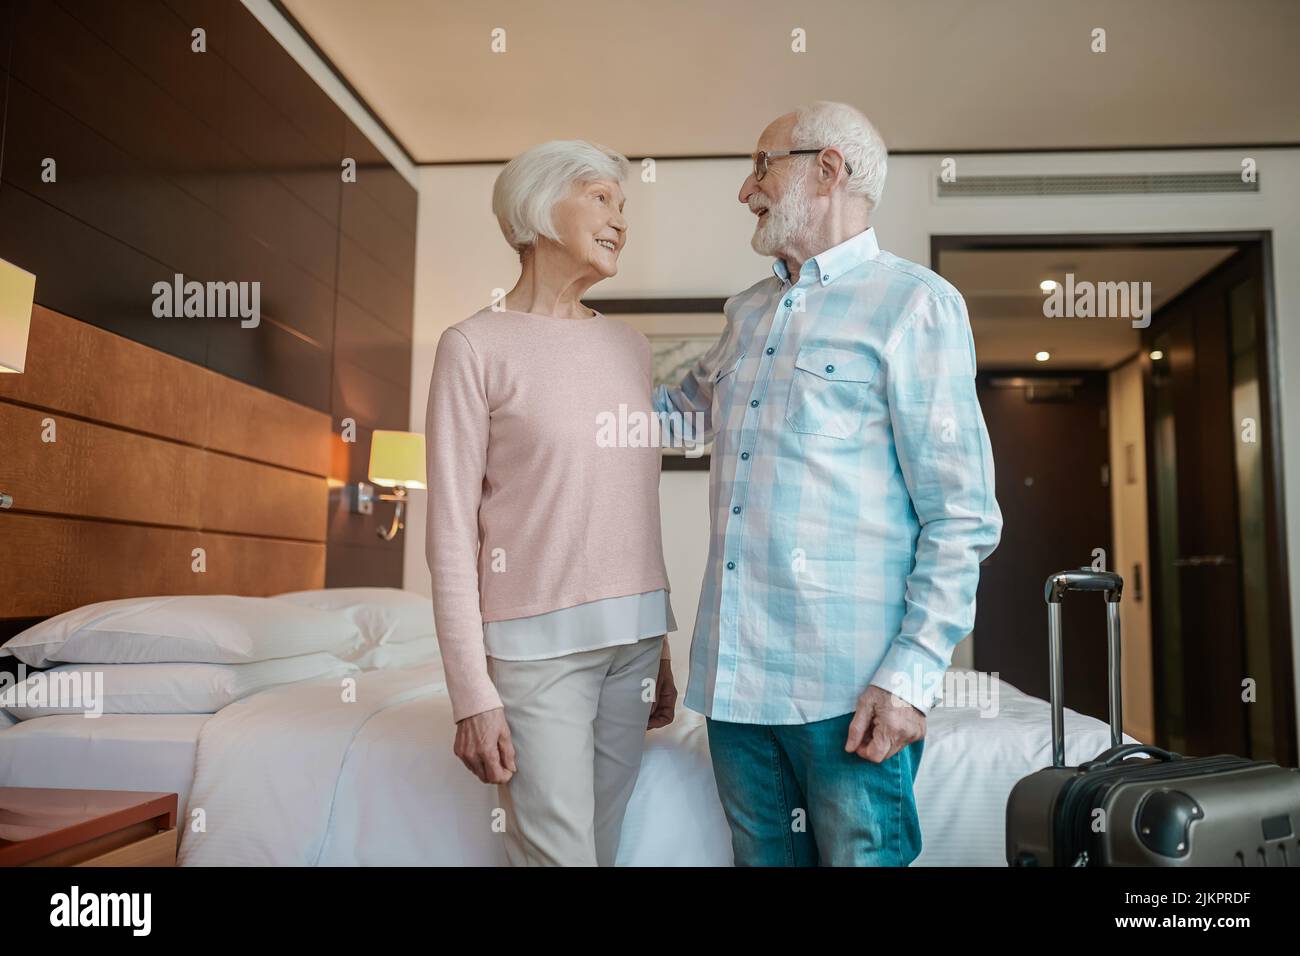 Senior happy couple in a hotel room looking cheerful and excited Stock Photo